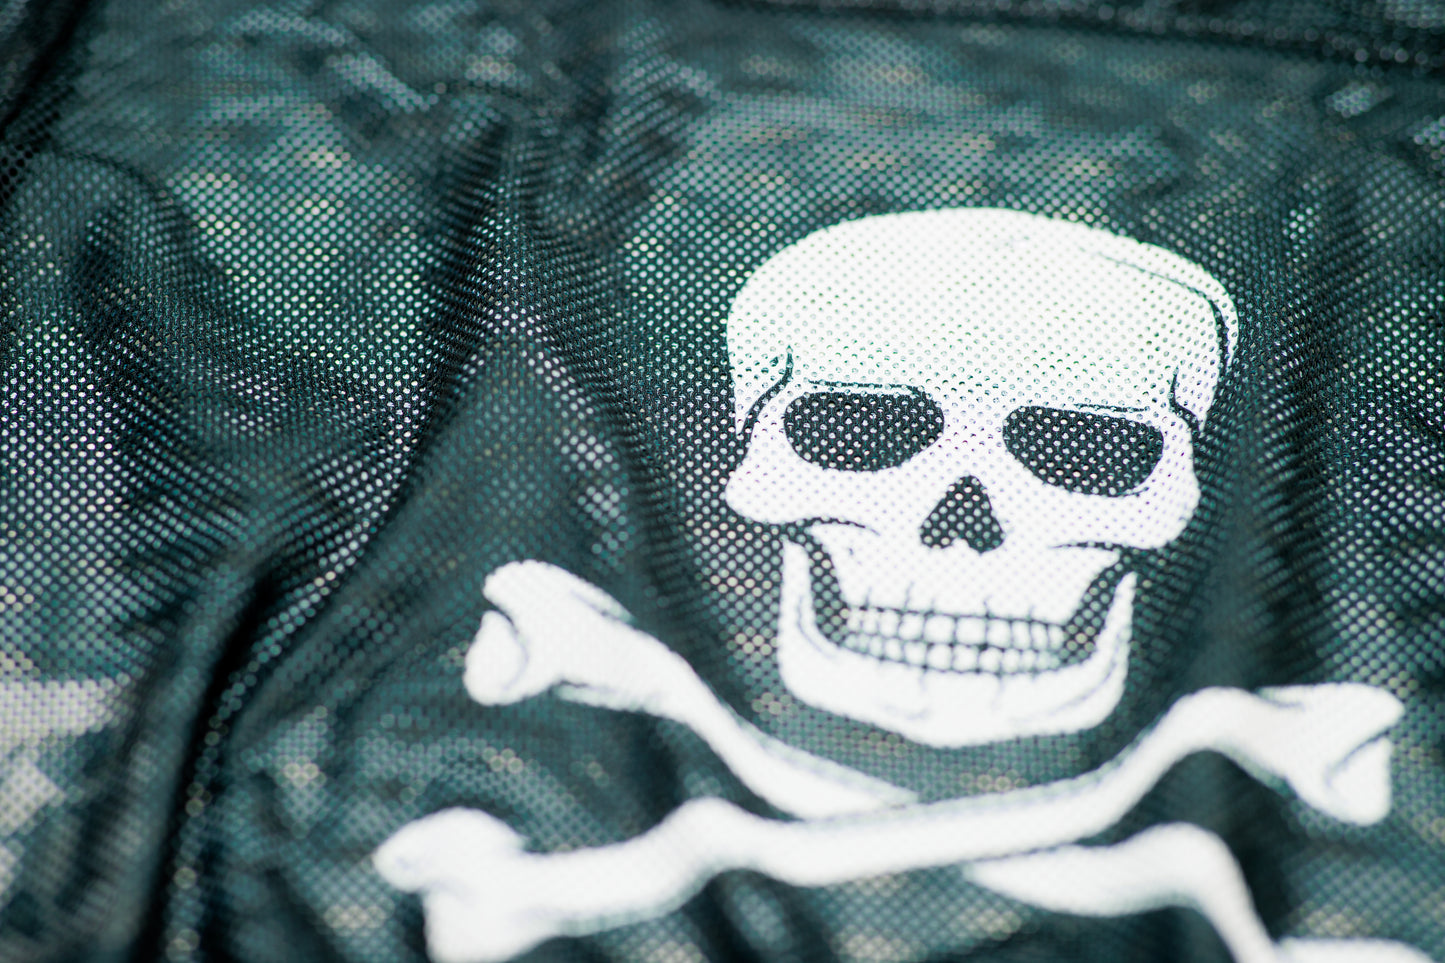 The Pirate Football Crop